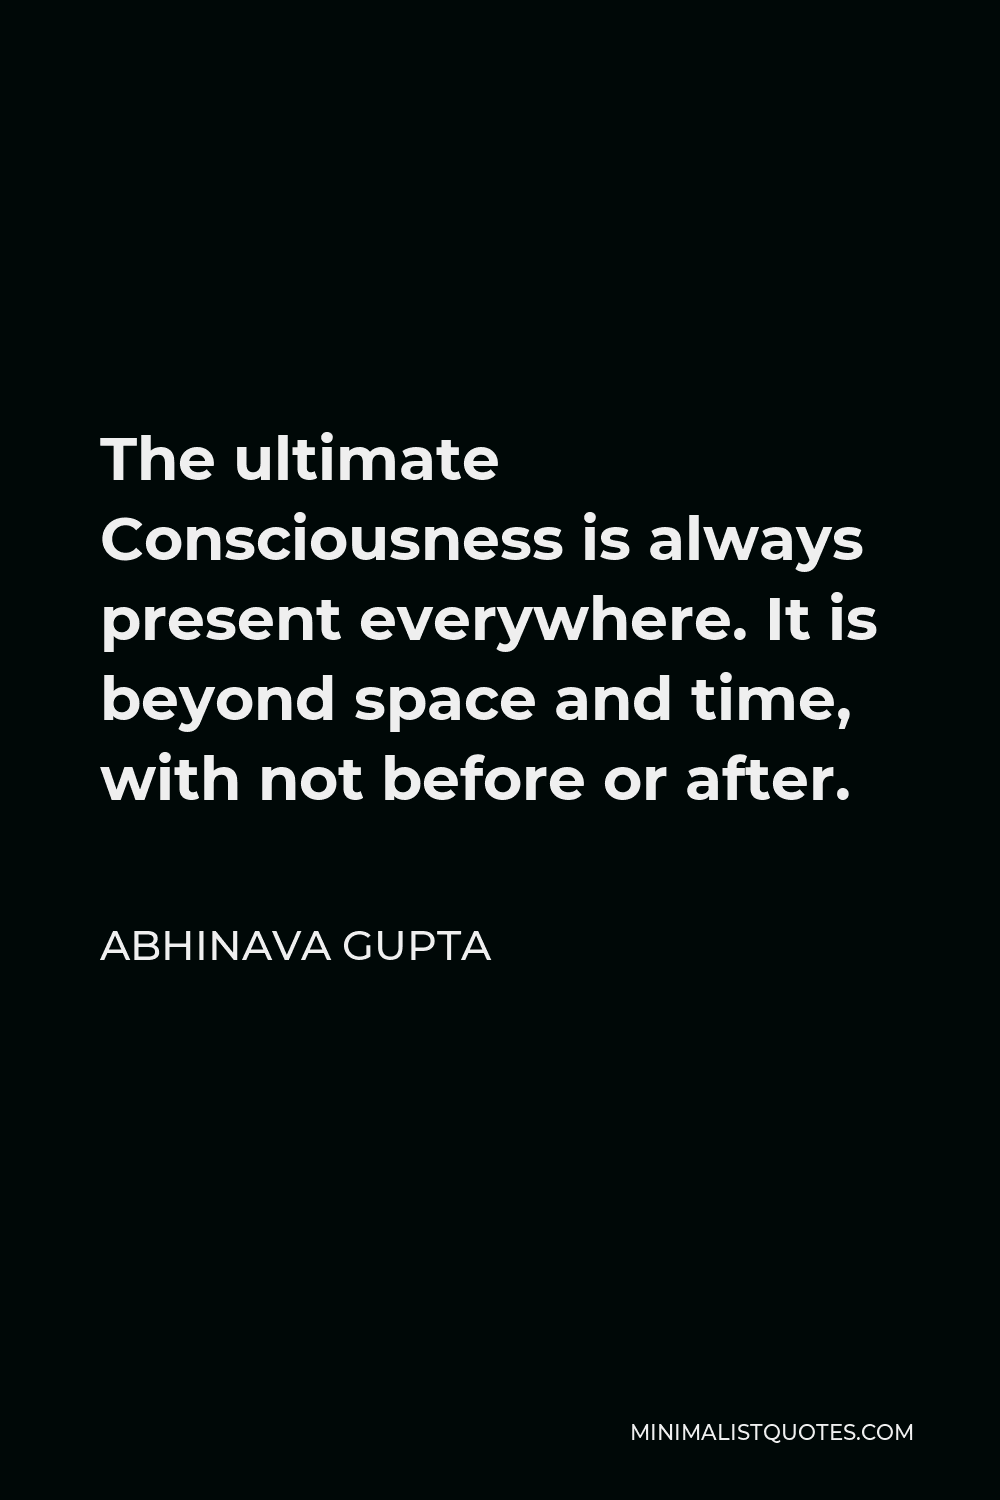 Abhinava Gupta Quote - The ultimate Consciousness is always present everywhere. It is beyond space and time, with not before or after.